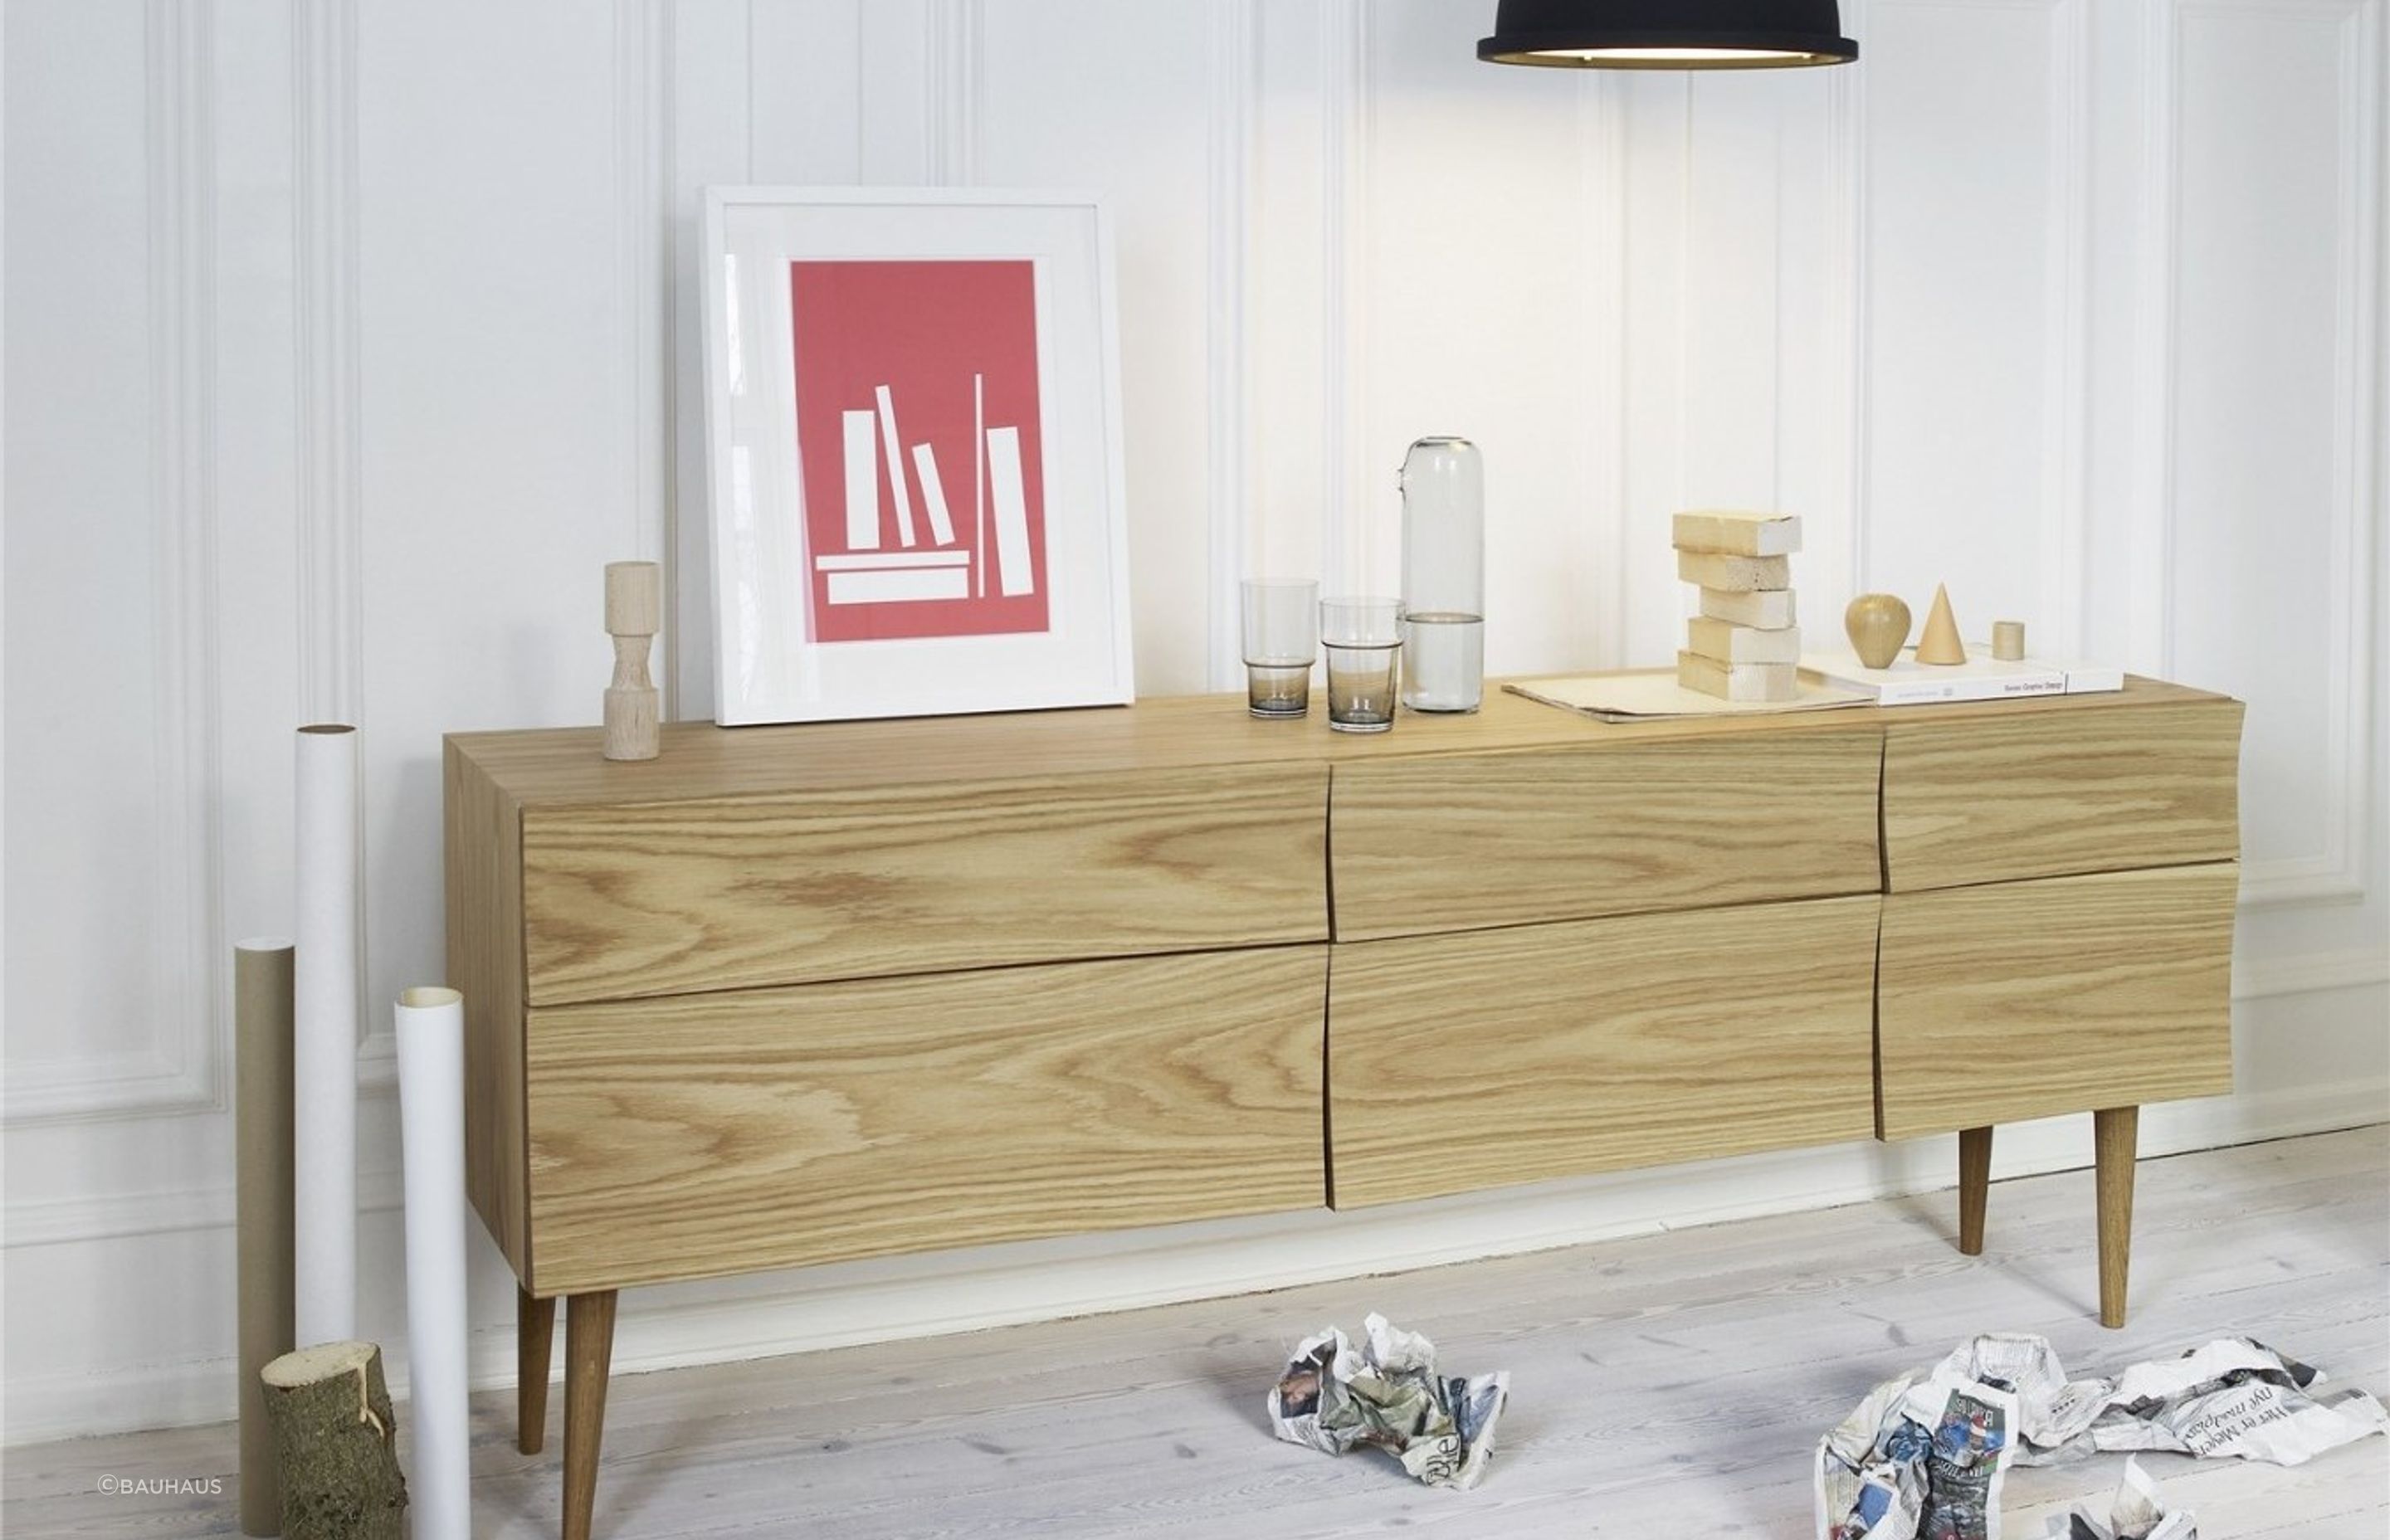 A clever blend of traditional and contemporary design with the Reflect Sideboard